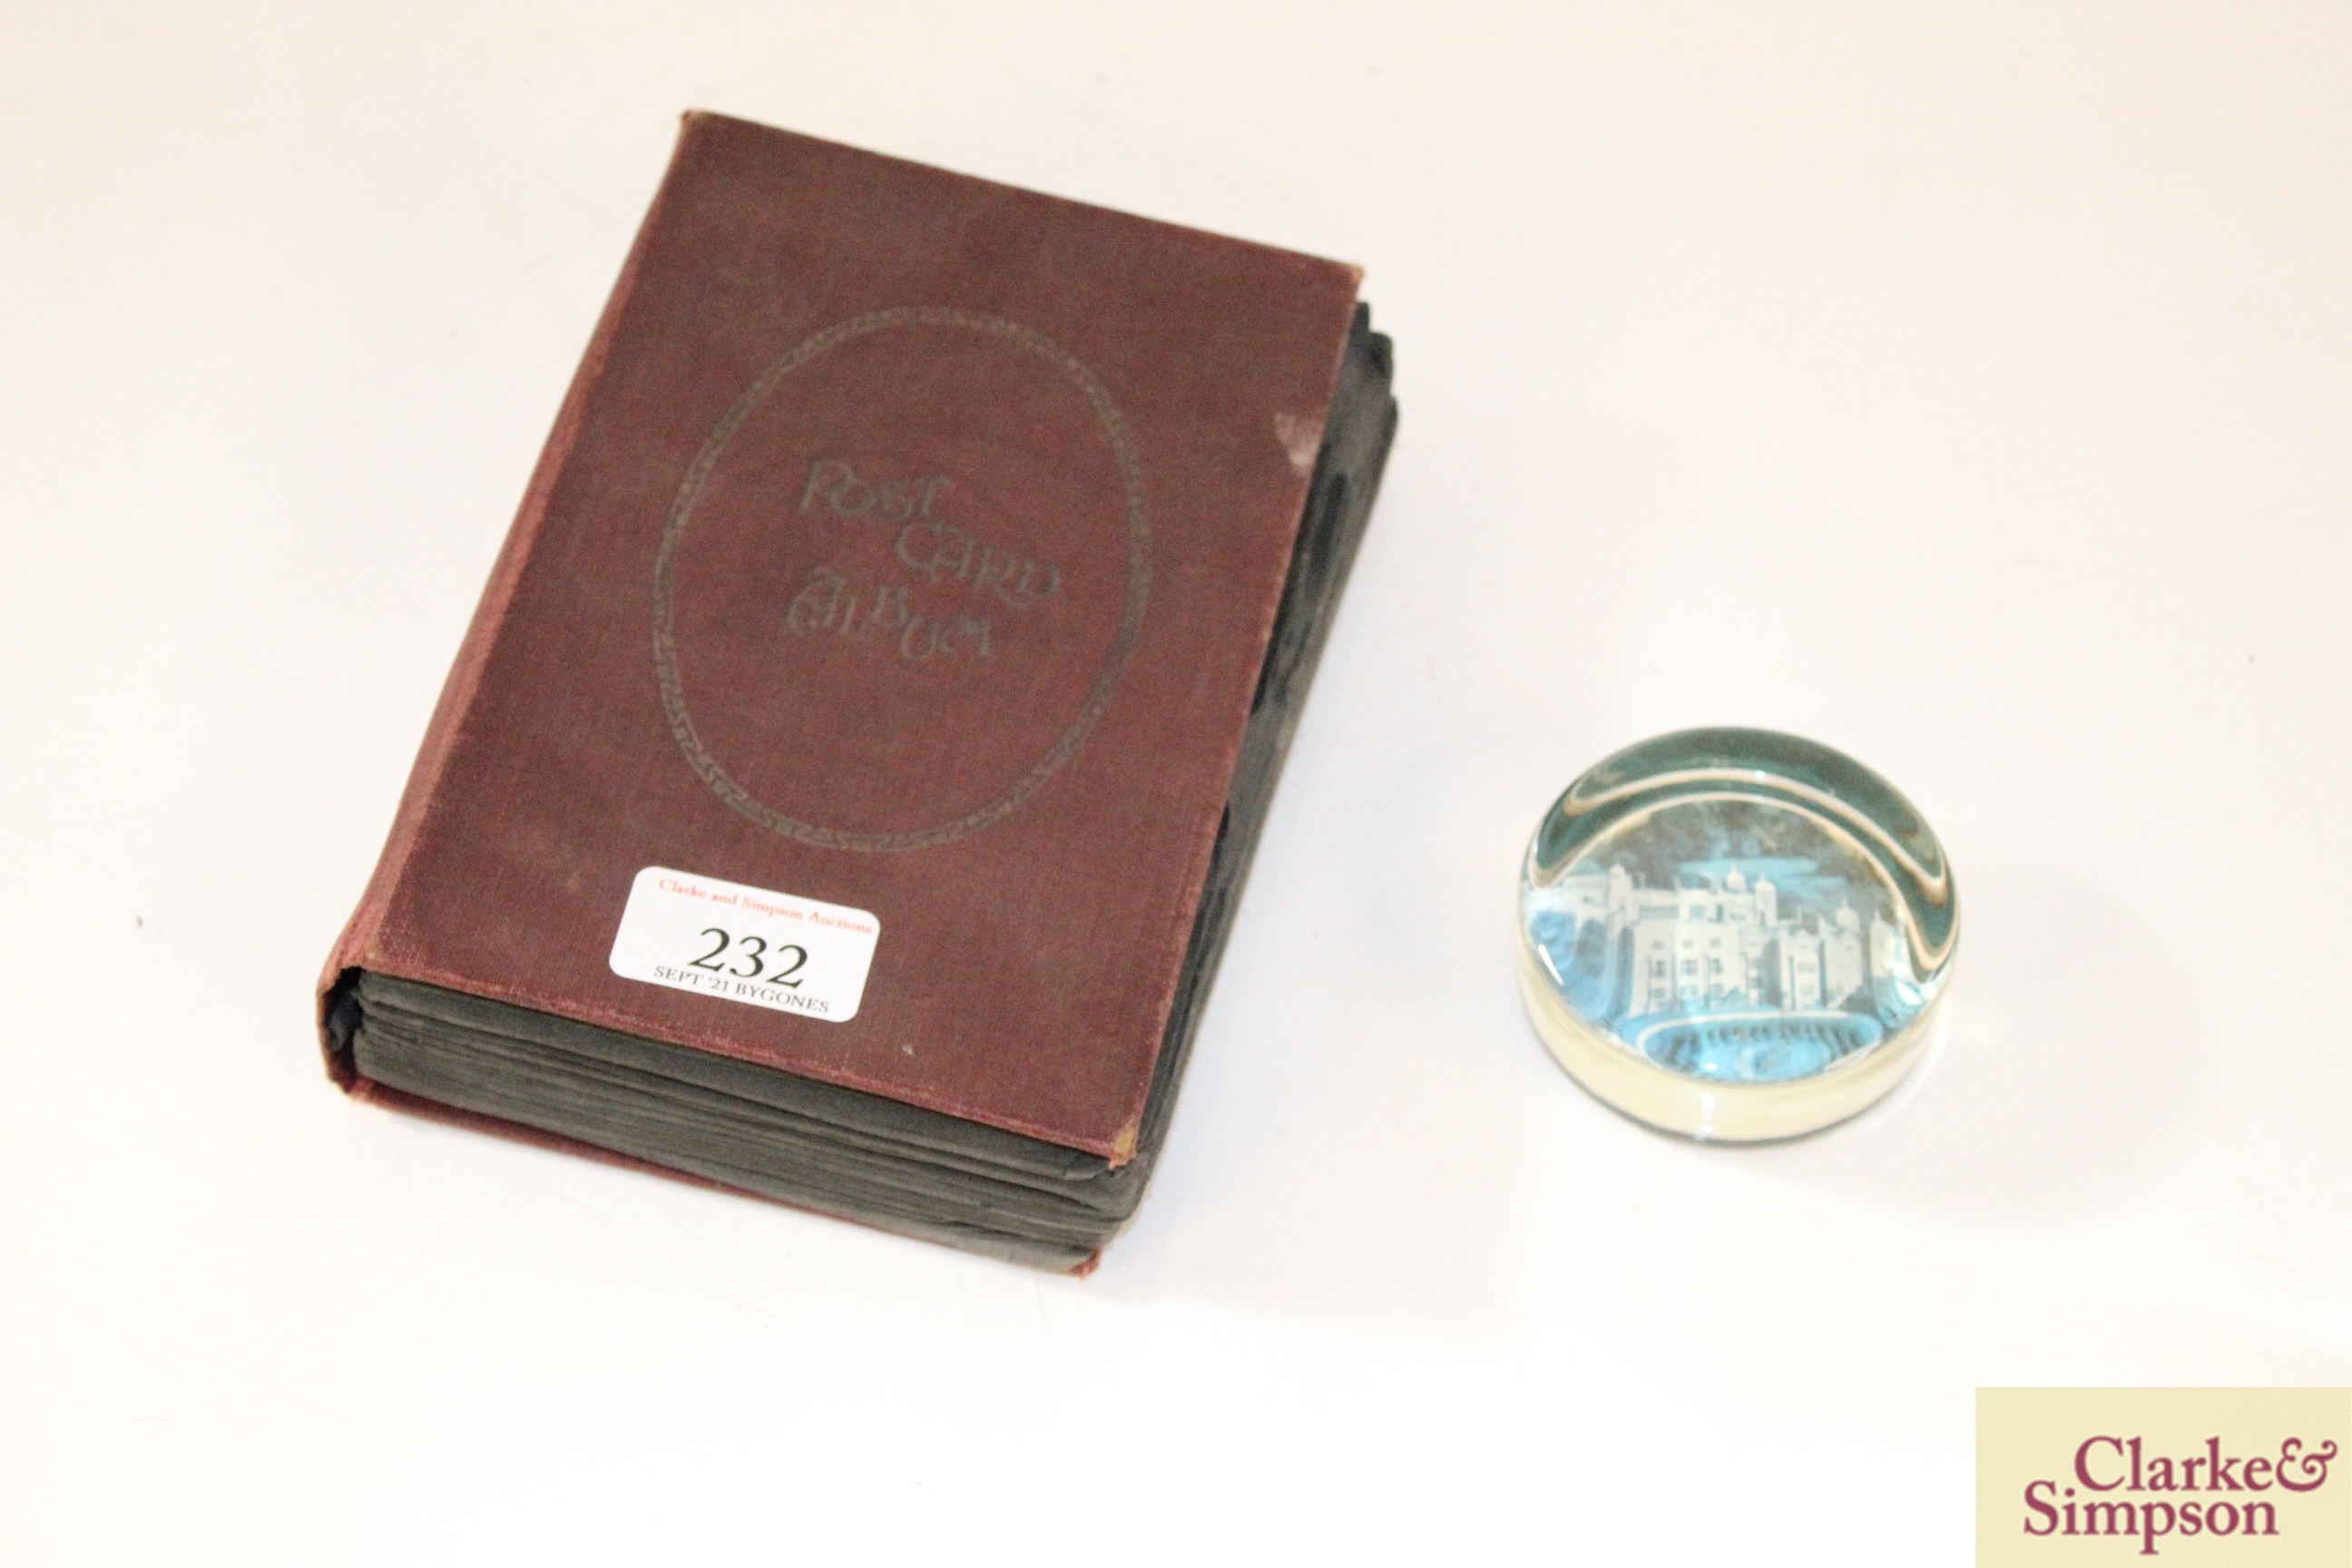 A small glass paperweight and a post-card album co